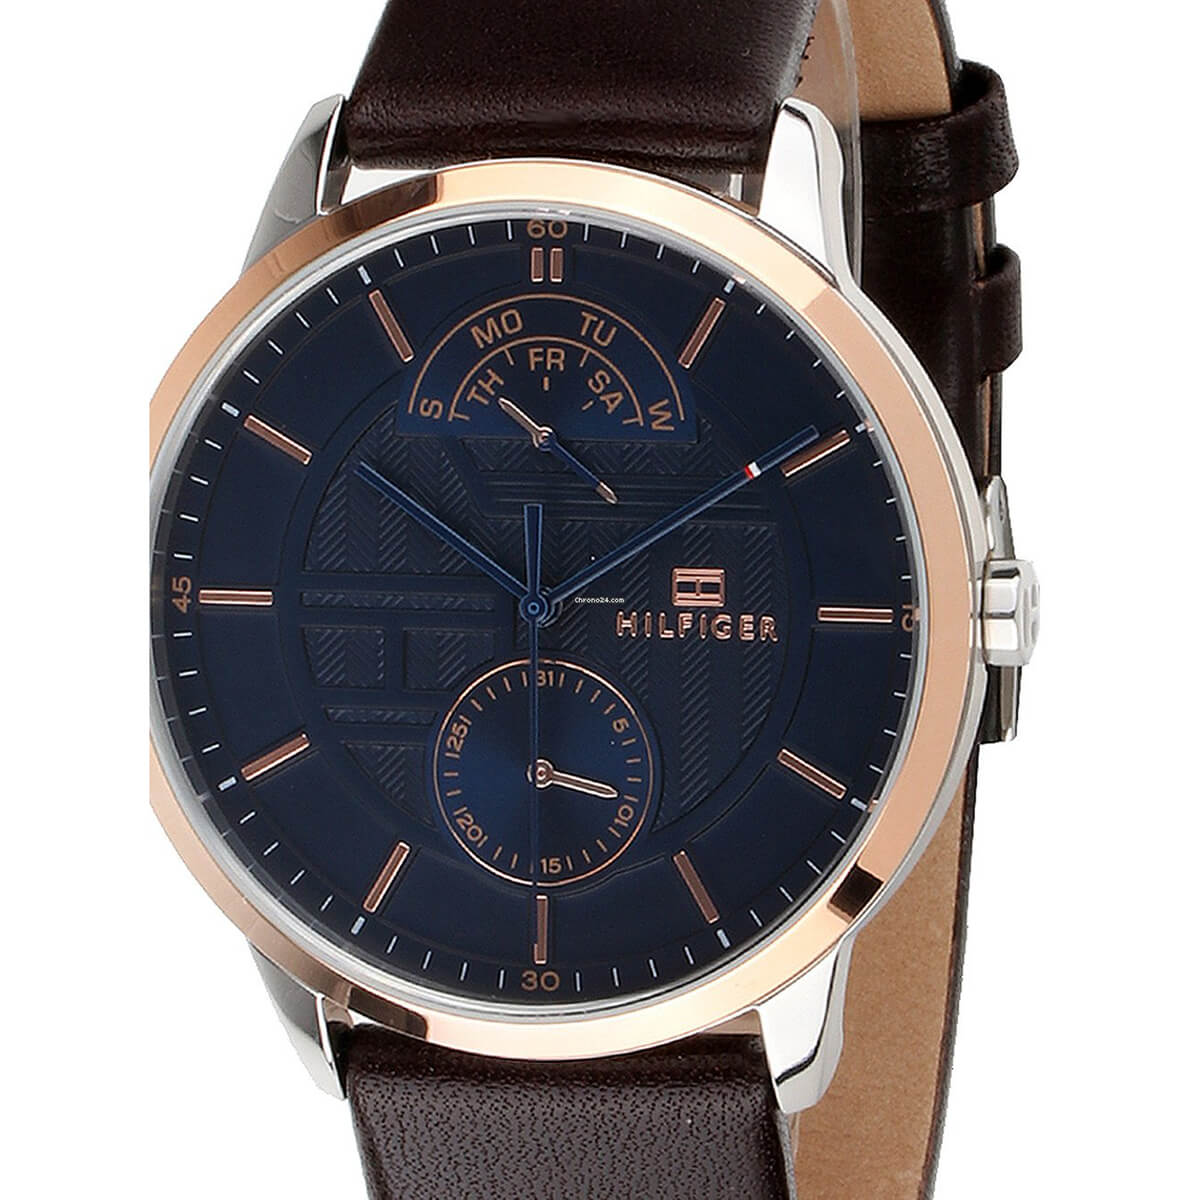 Tommy Hilfiger Hunter Blue Dial Brown Leather Strap Watch for Men - 1791605